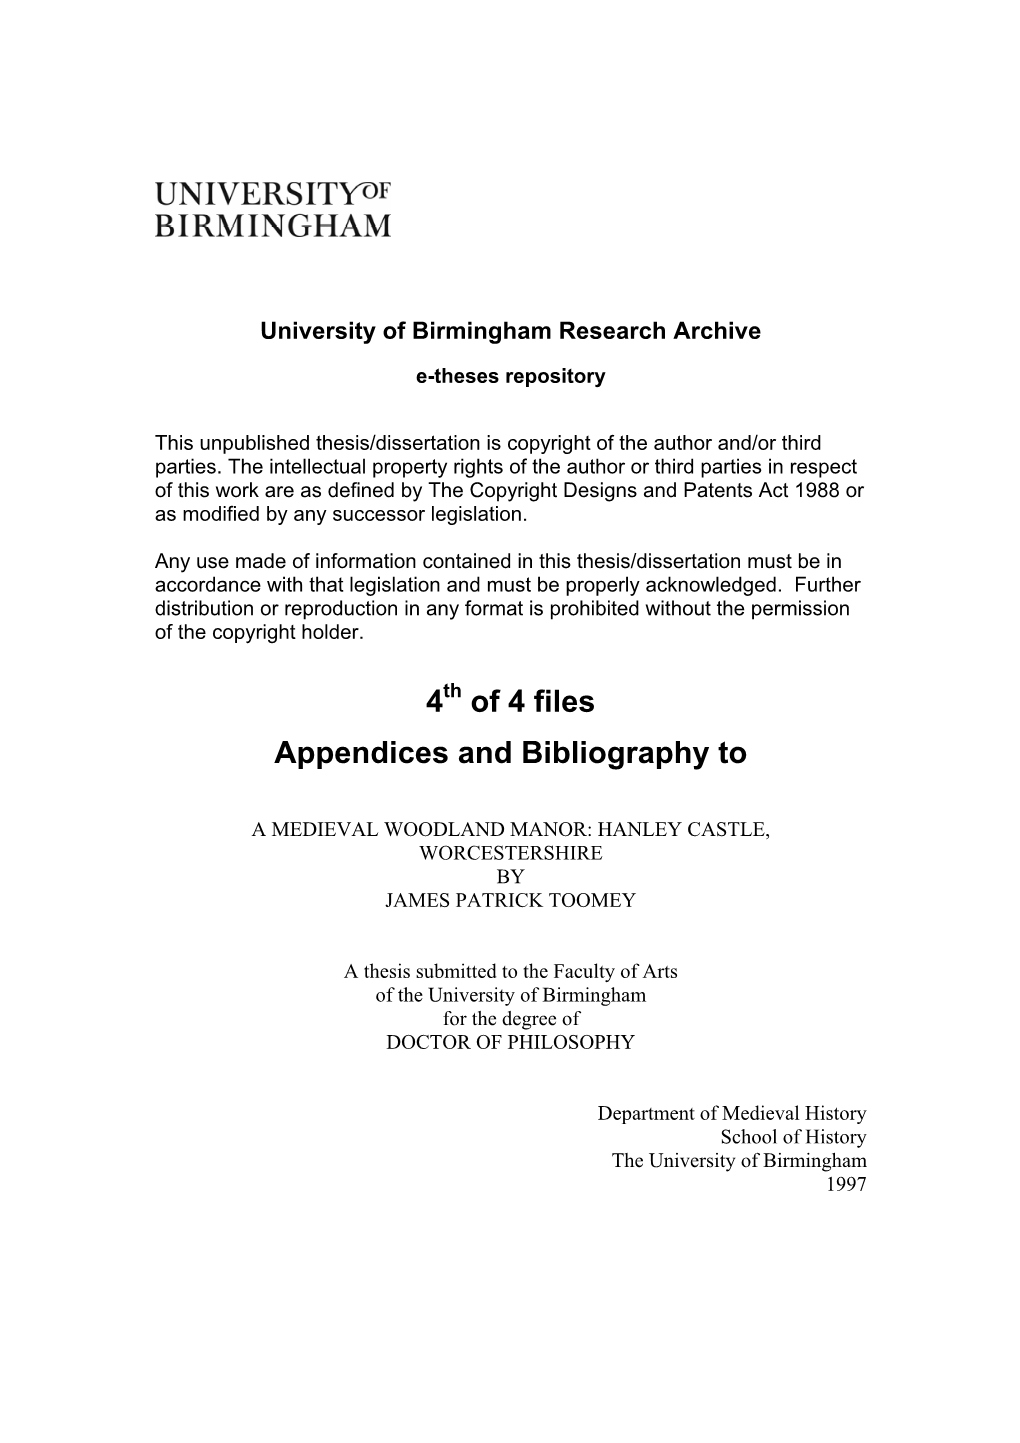 4 of 4 Files Appendices and Bibliography To